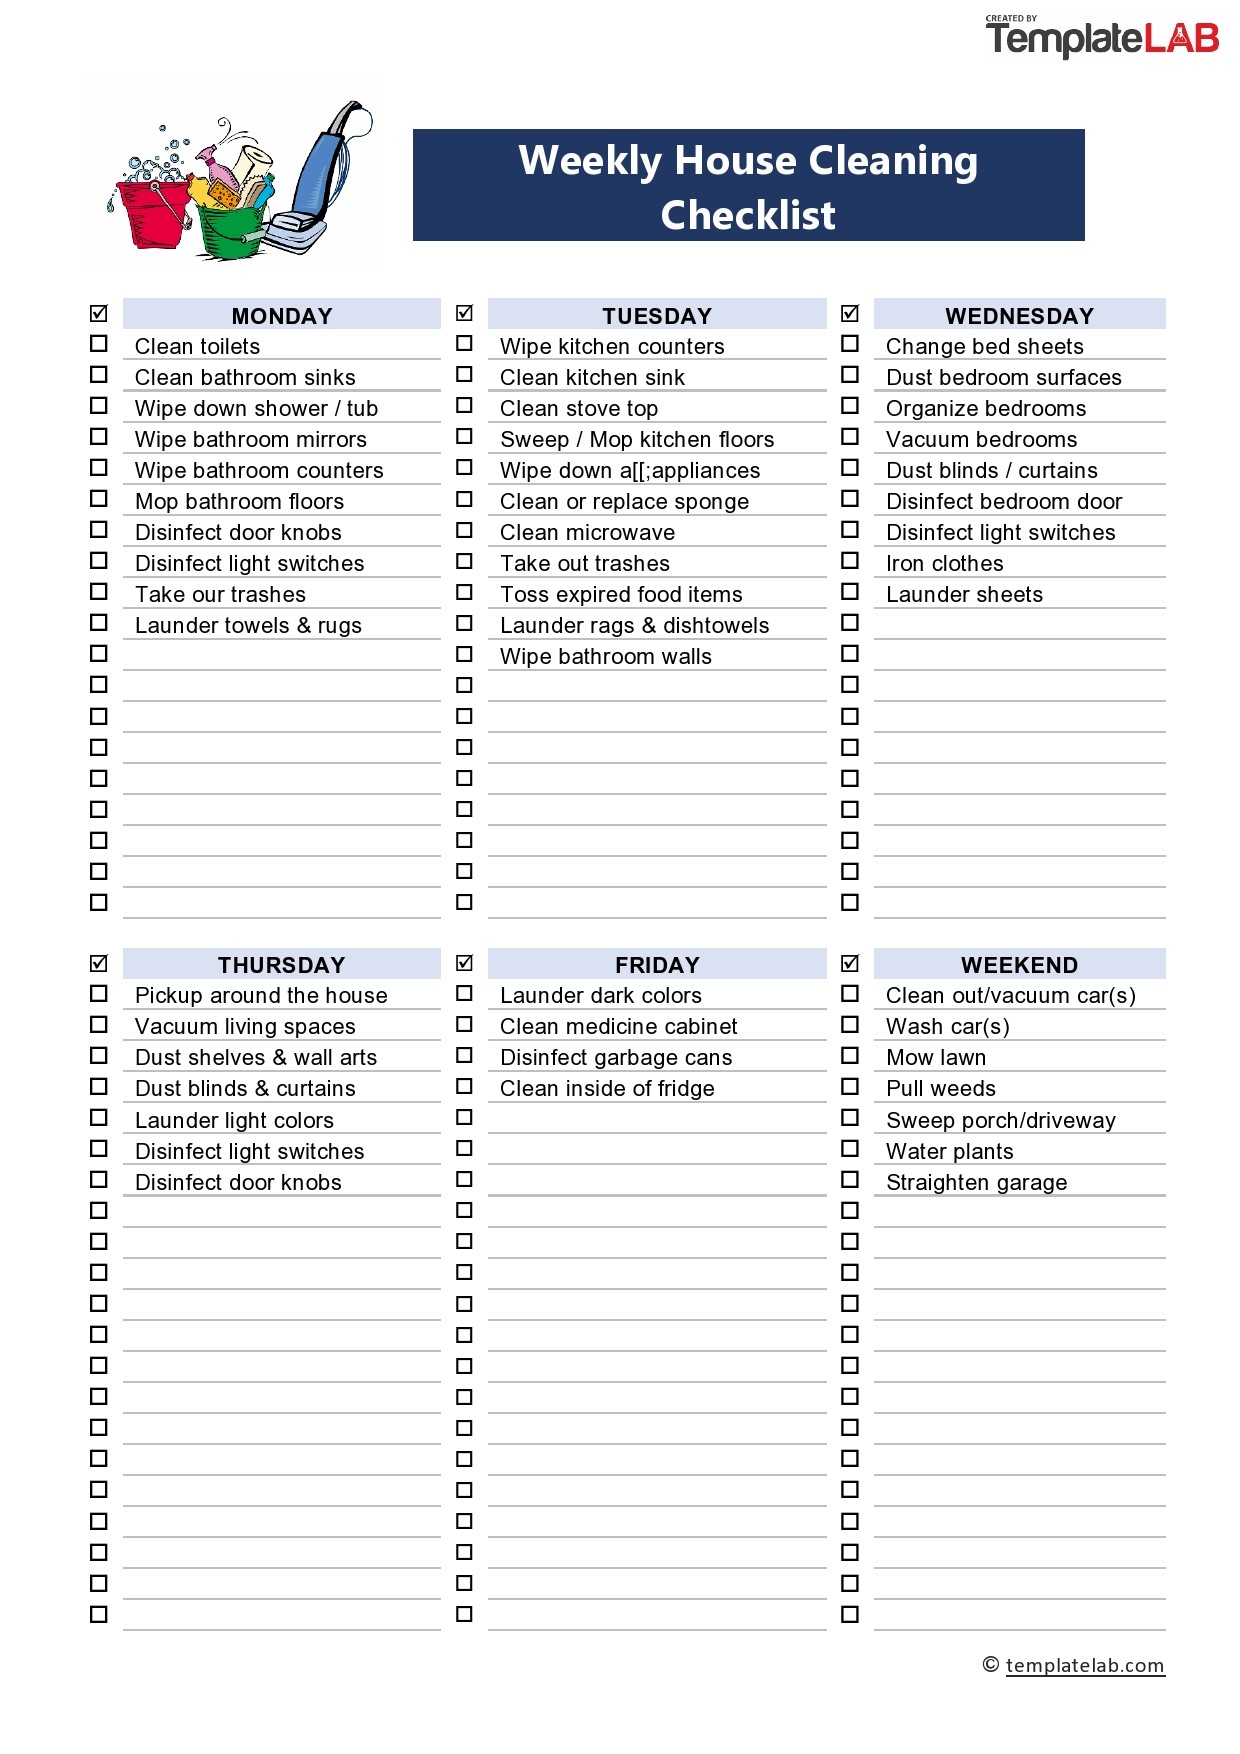 Cleaning Schedule Template Printable House Cleaning Checklist Arnoticias tv